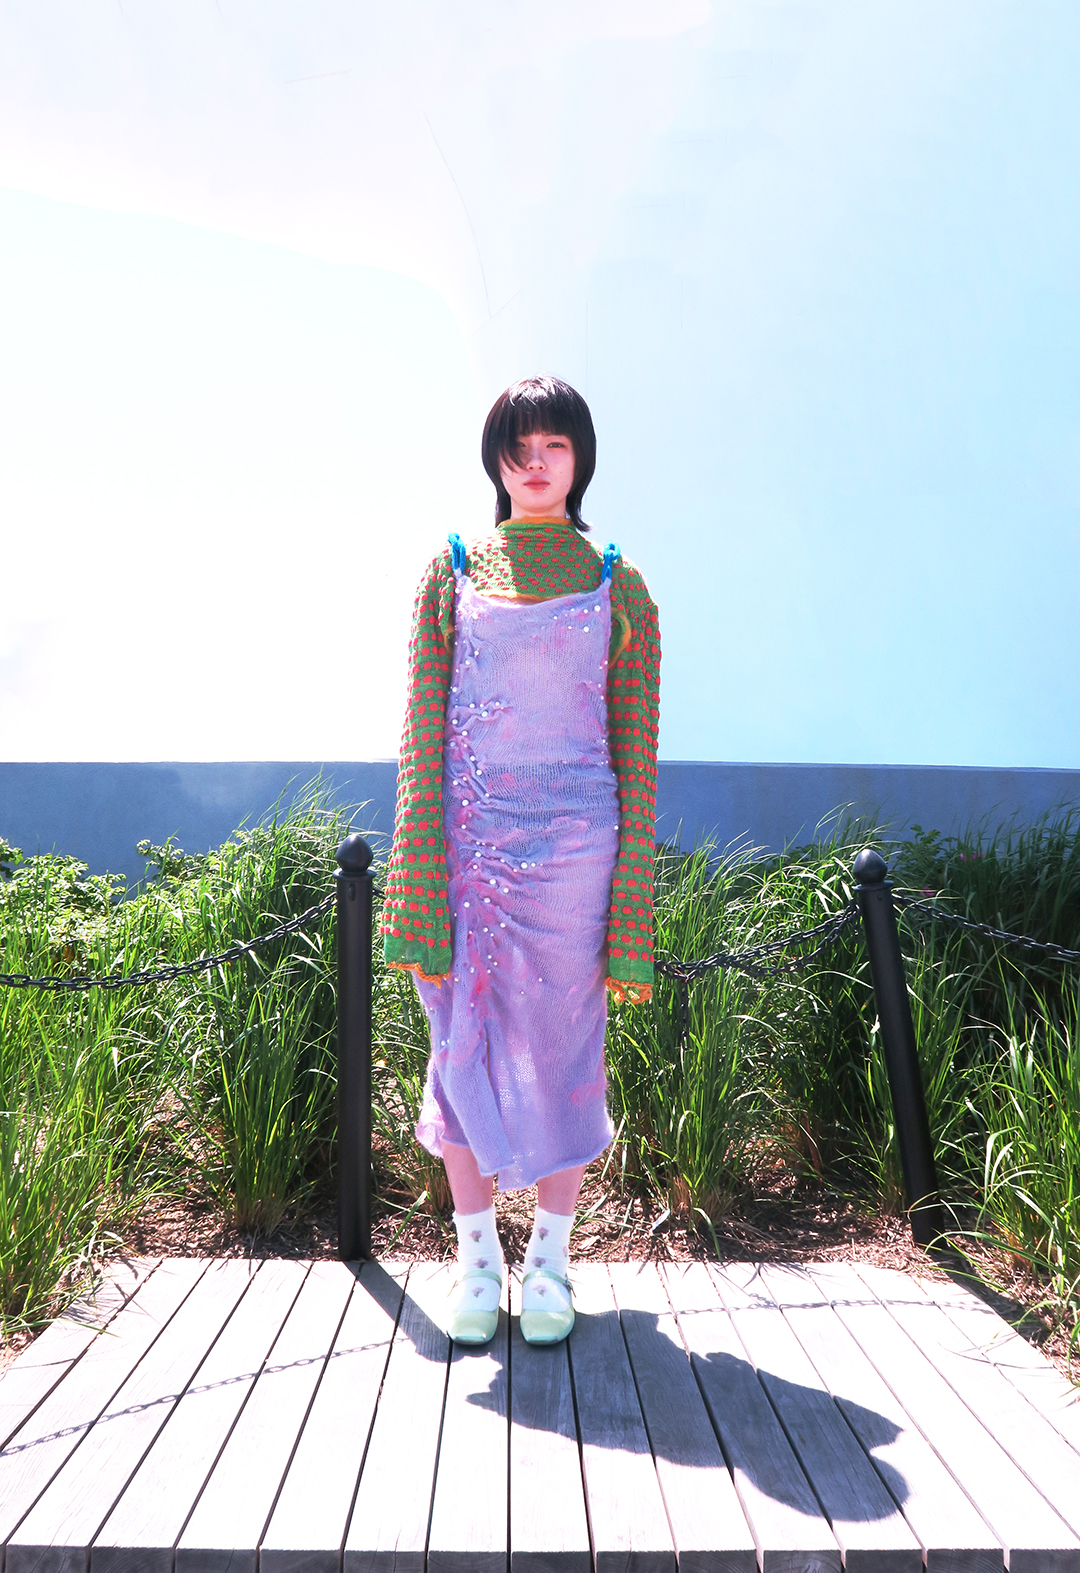 Front view of a model wearing a green sweater with red polka dots and a pink spaghetti straps knit dress over the sweater. The model is standing on a deck and there is tall grass in the background.